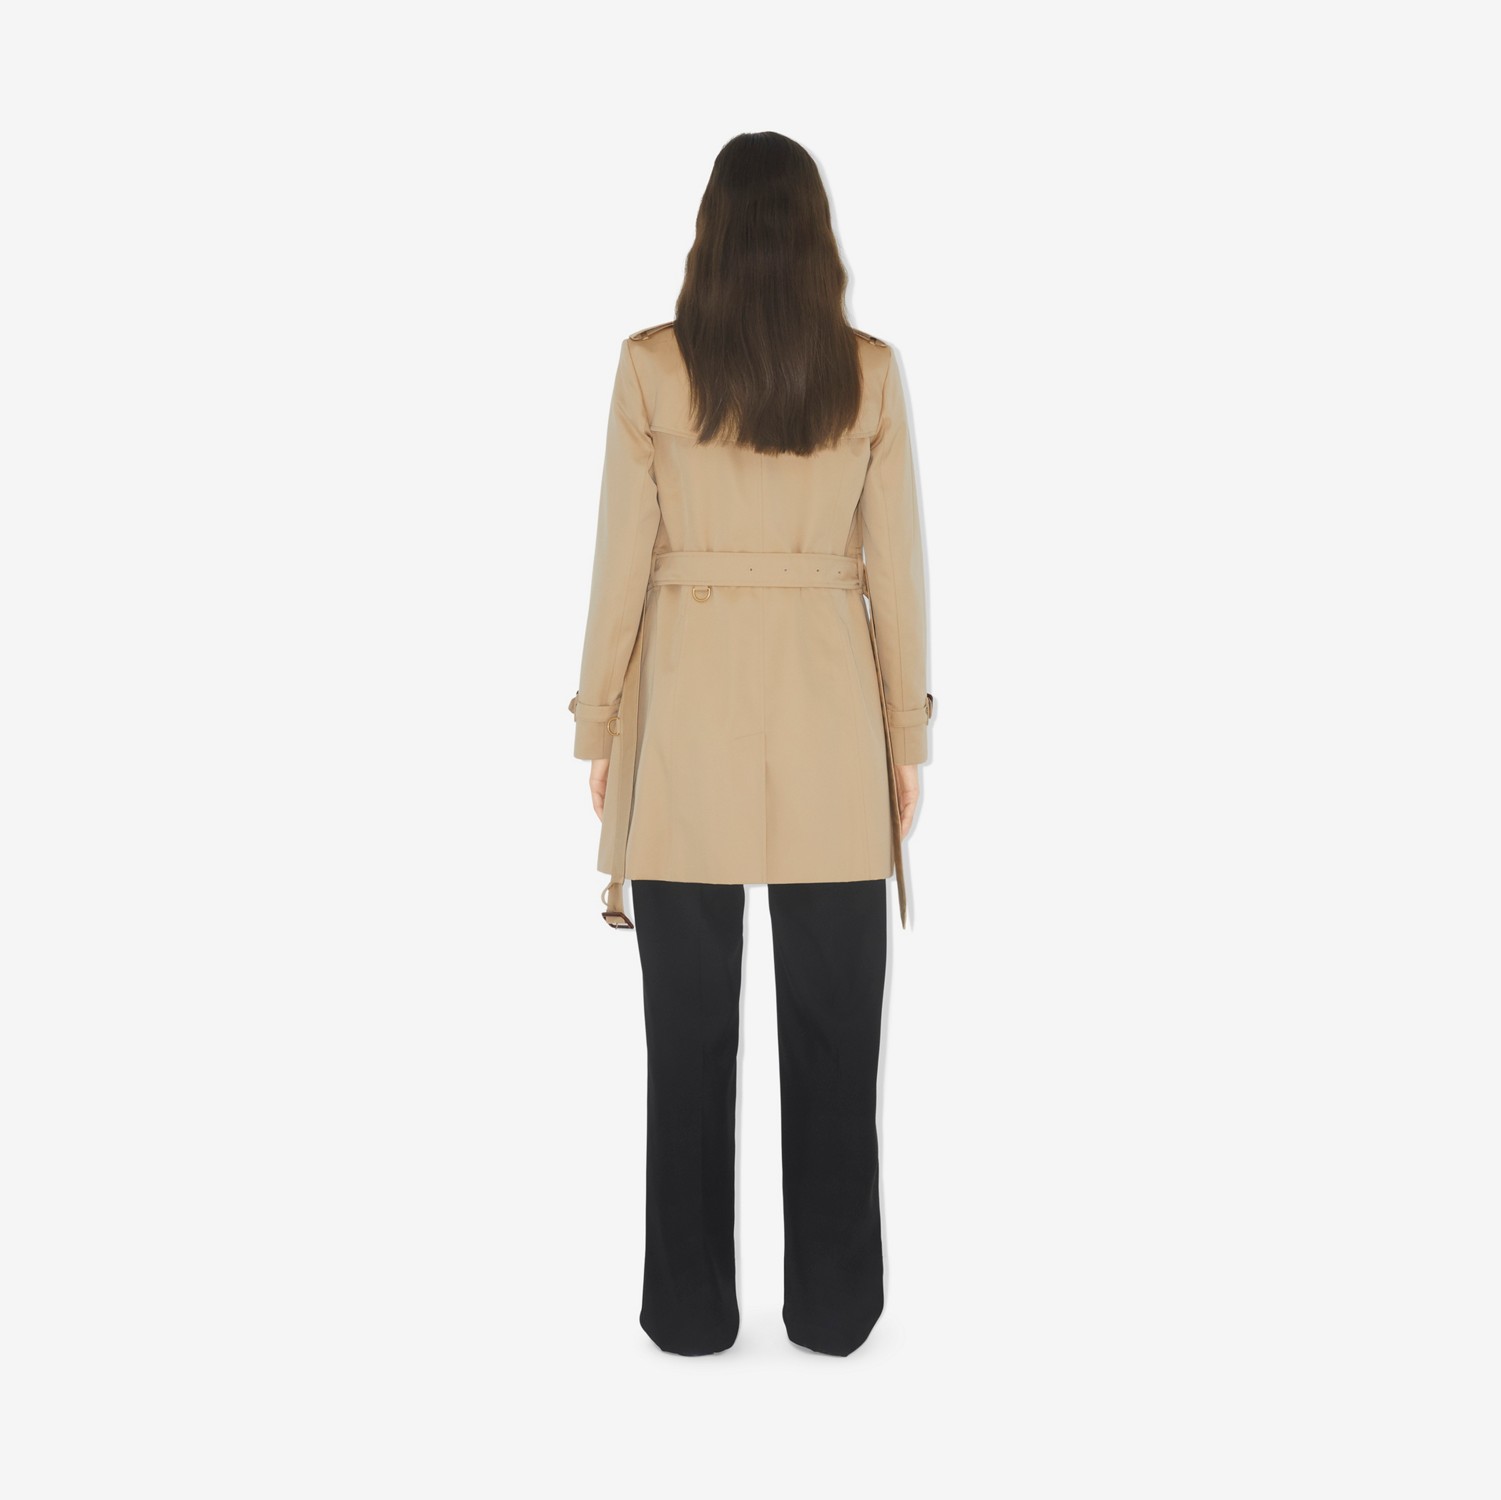 Chelsea - Trench coat Heritage curto (Mel) - Mulheres | Burberry® oficial